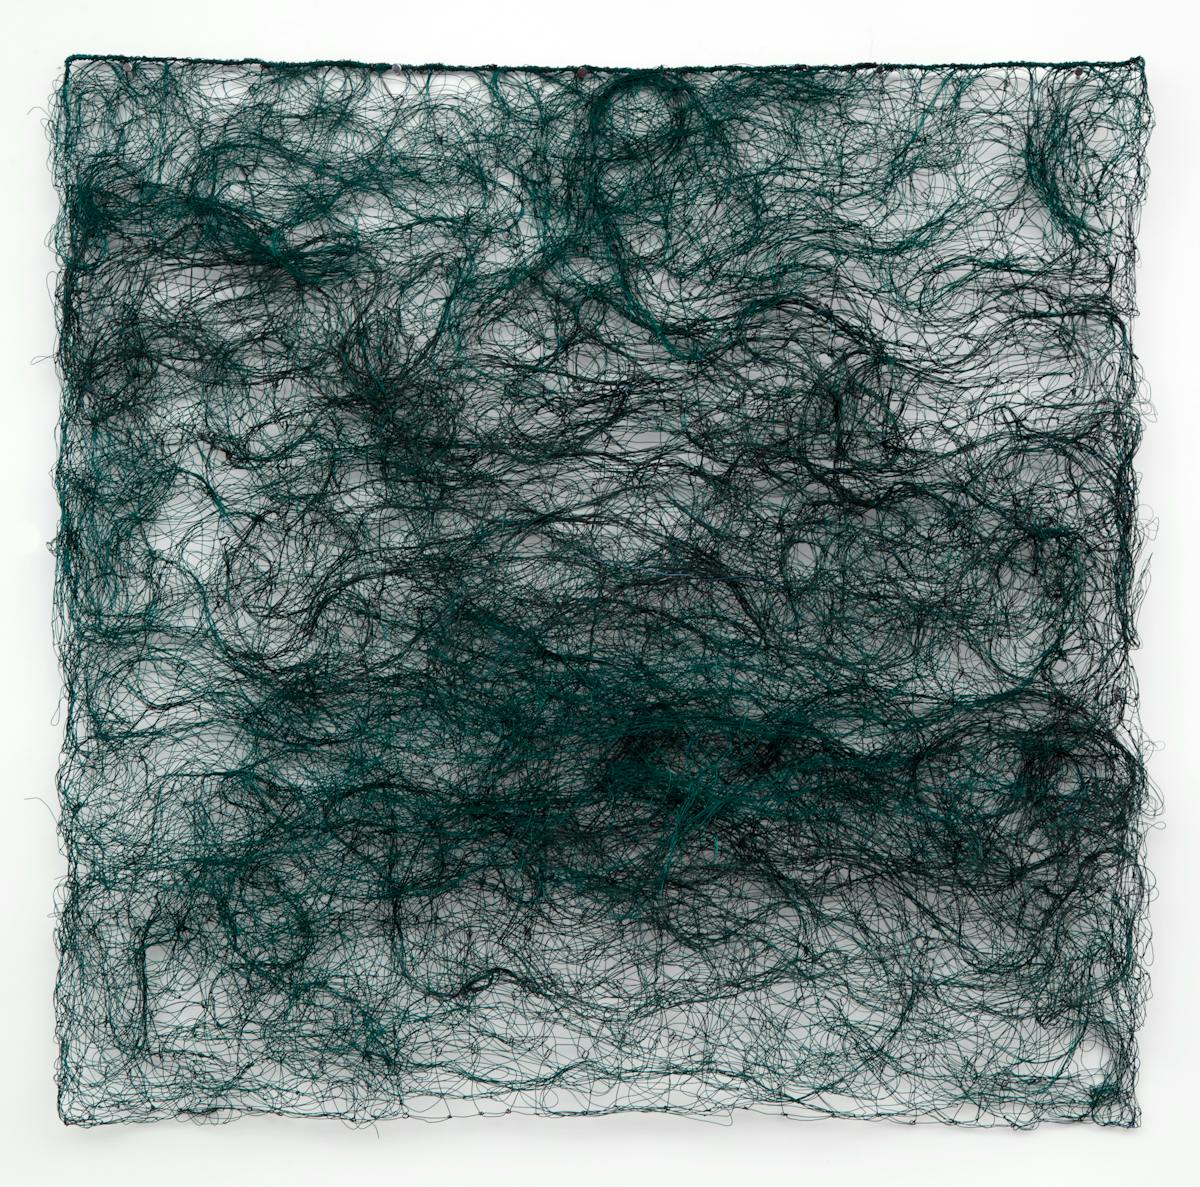 textile wall artwork in the form of a square of dark teal wool like fiber